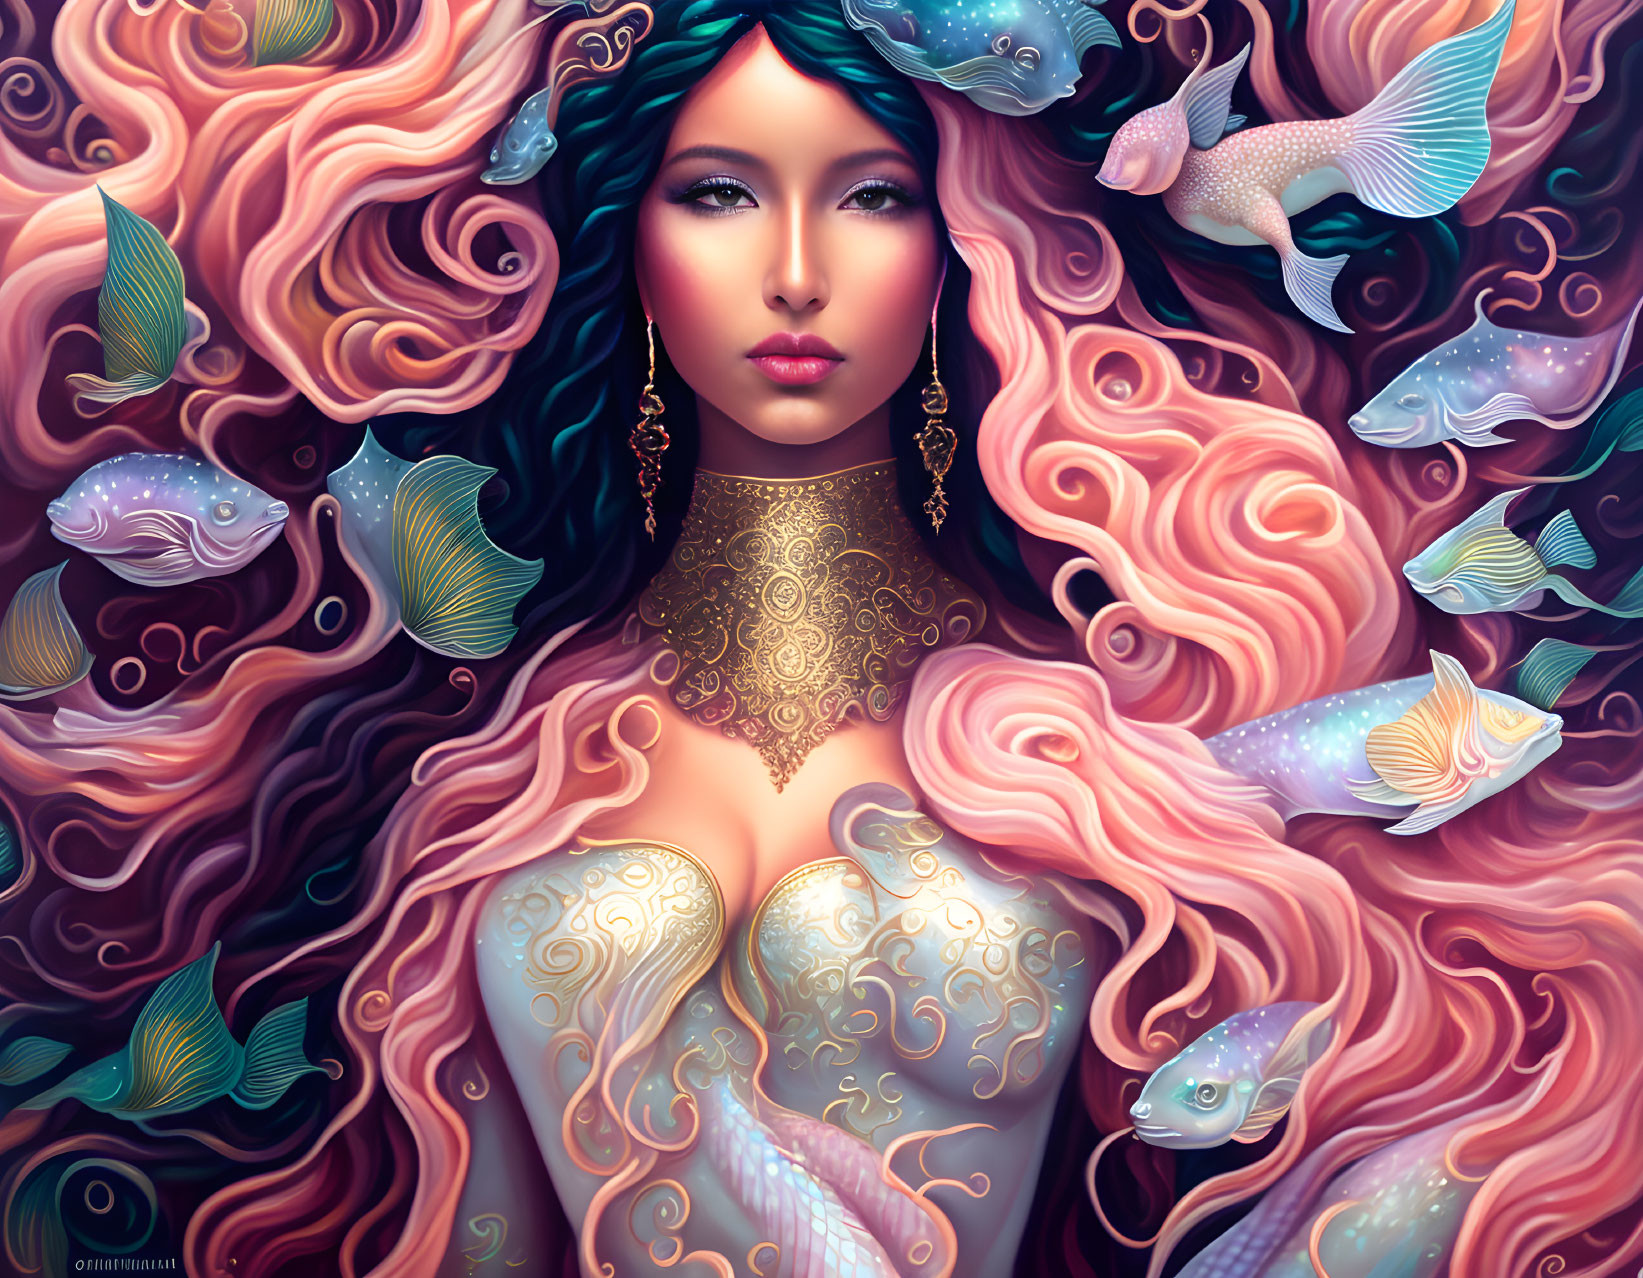 Fantasy oceanic theme: Woman with flowing hair and fish, adorned in intricate gold patterns